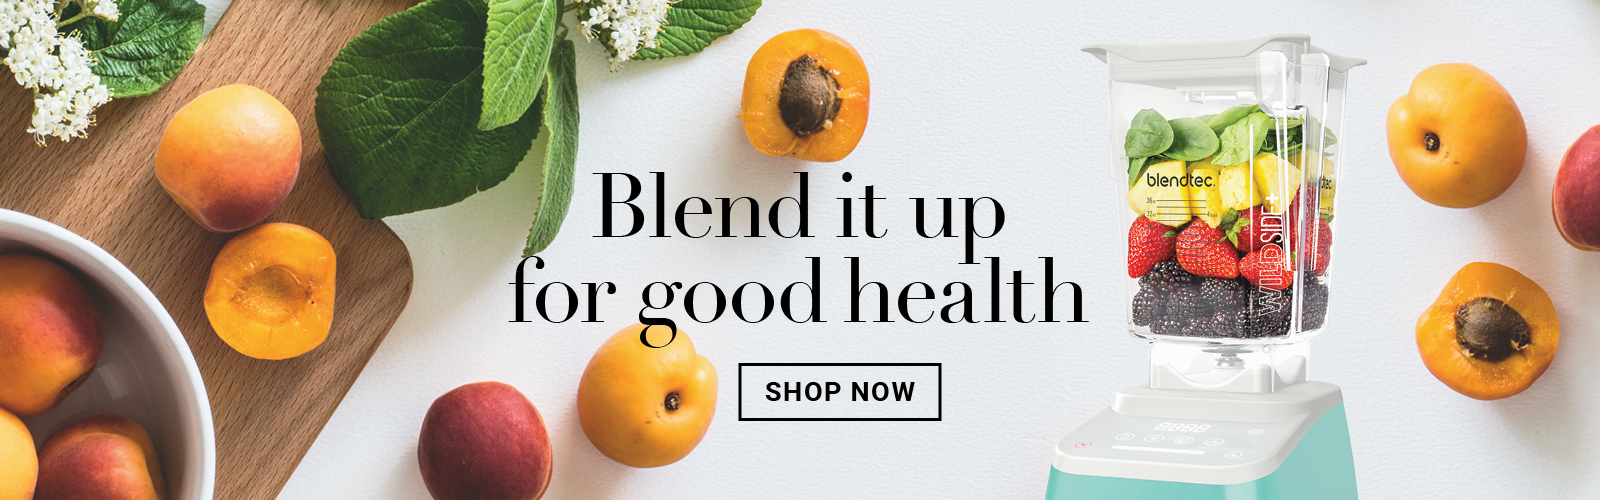 Blend It Up for Good Health